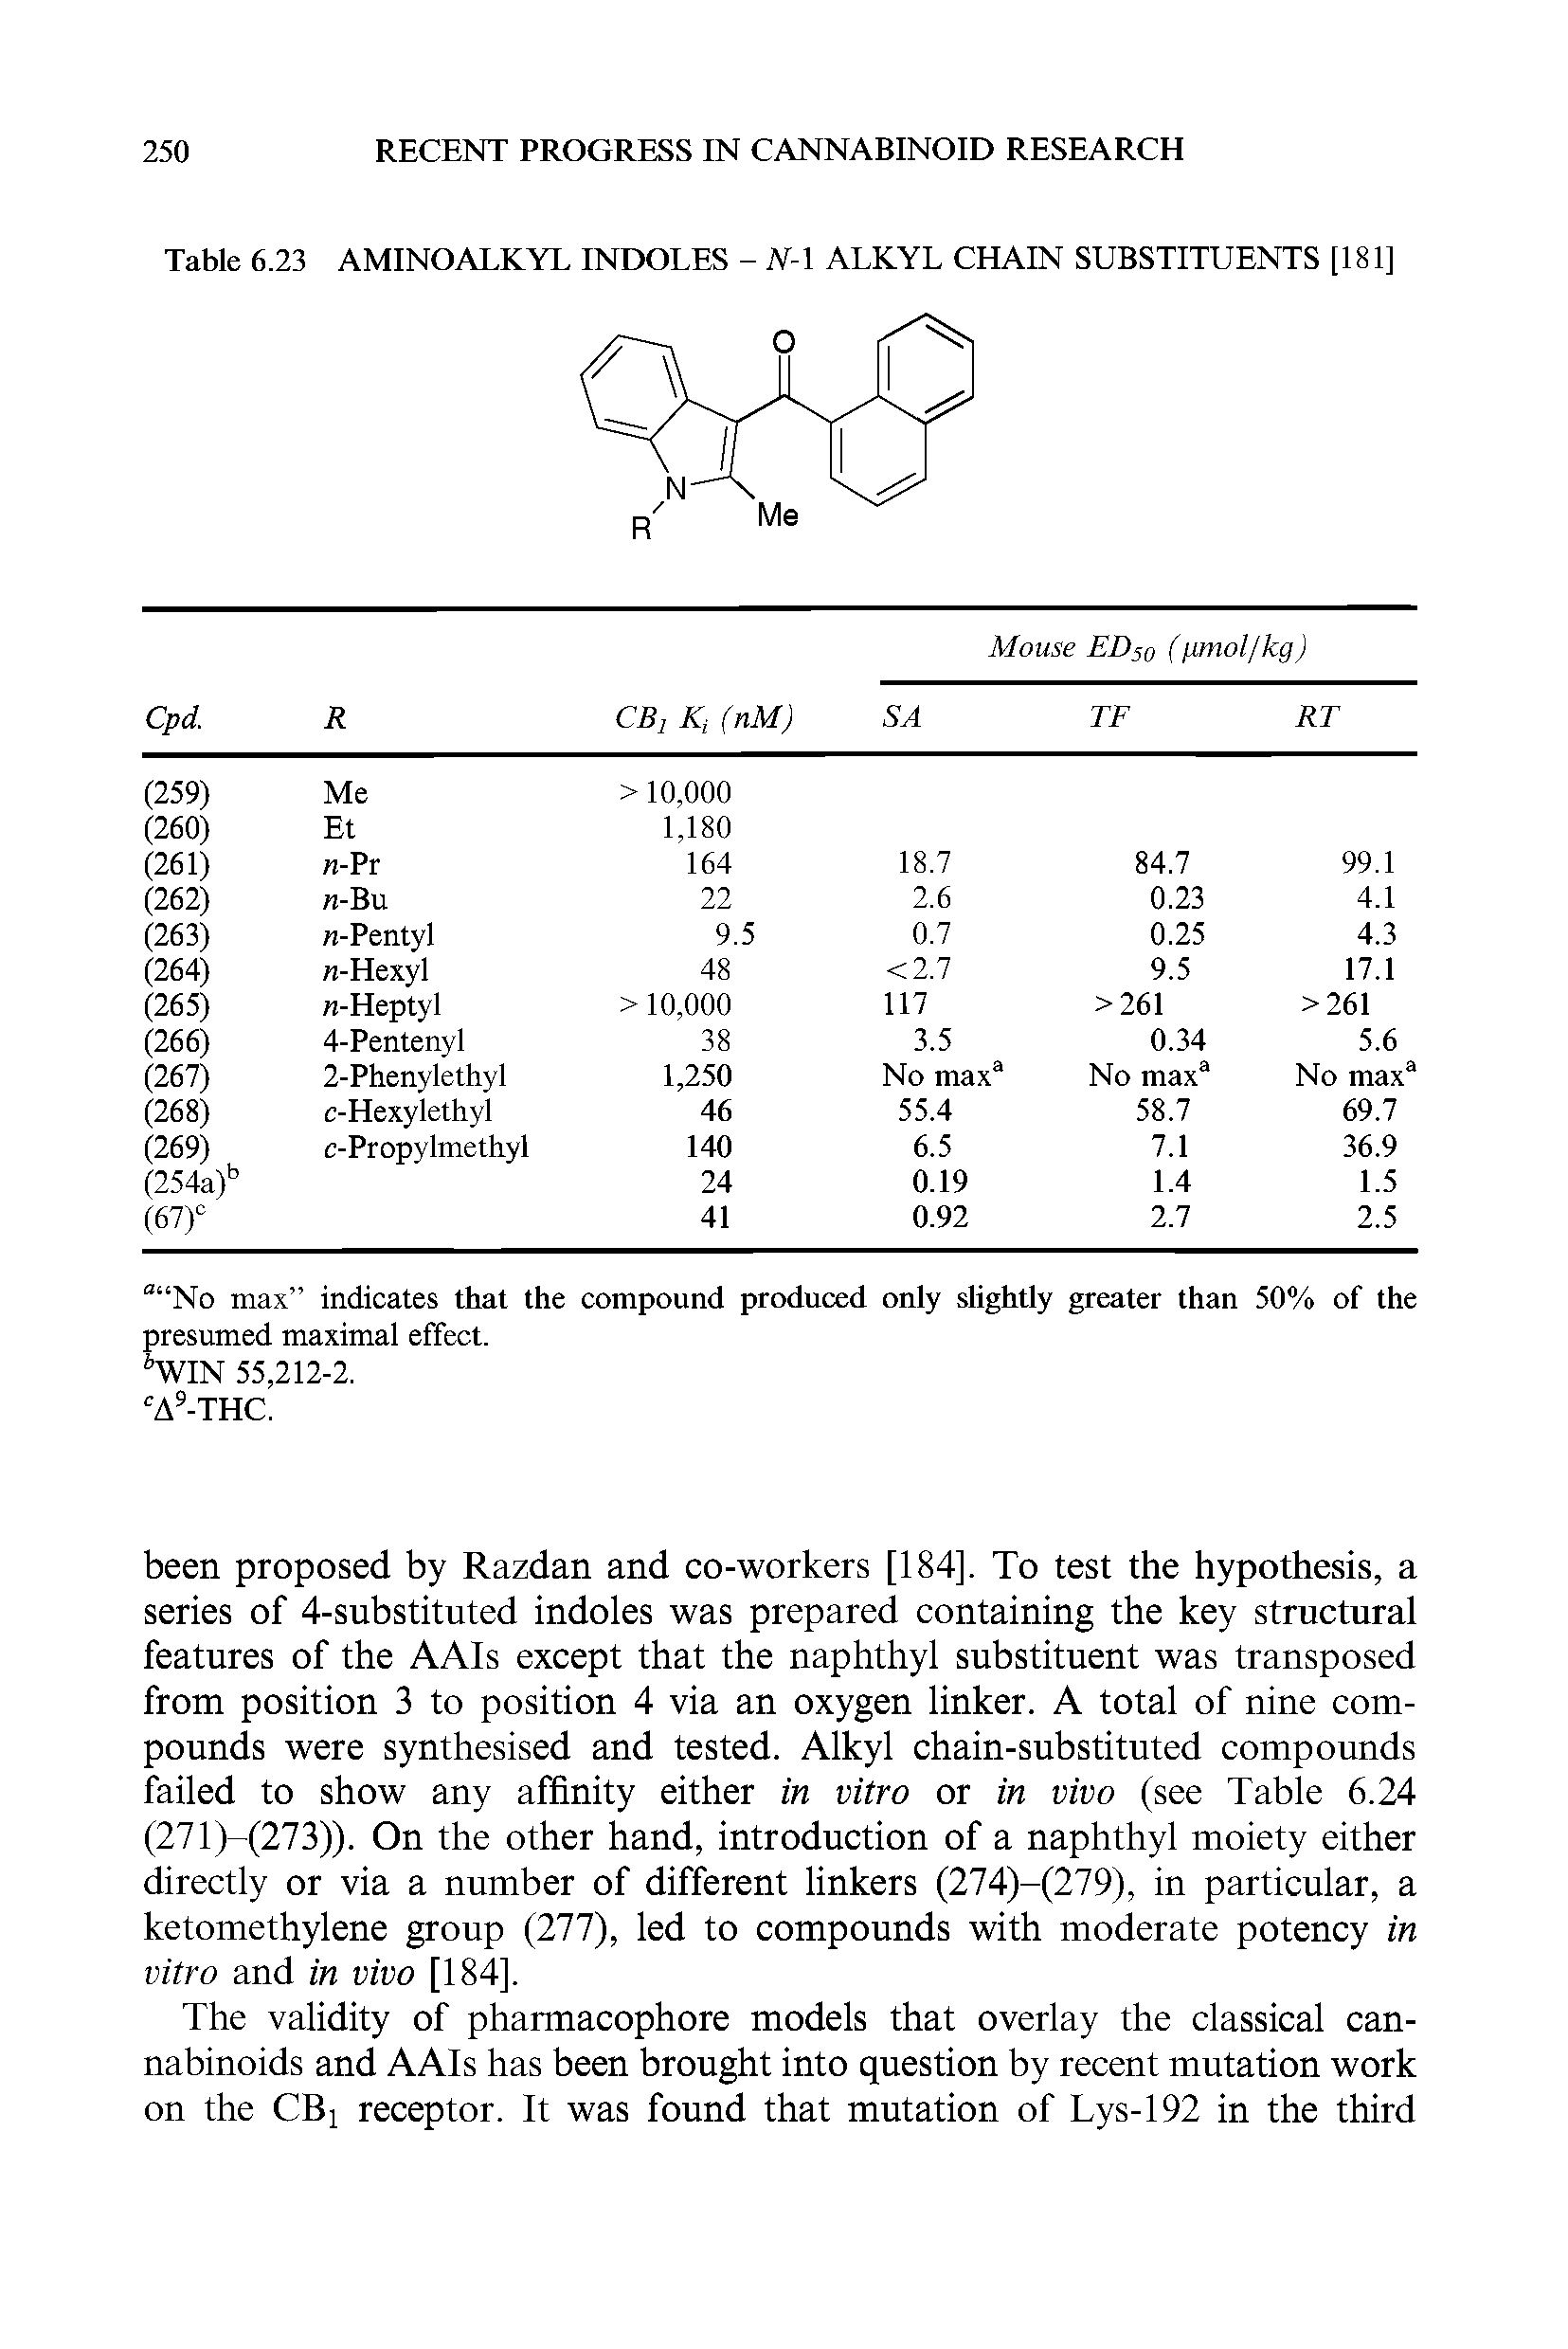 Table 6.23 AMINOALKYL INDOLES - N- ALKYL CHAIN SUBSTITUENTS [181]...